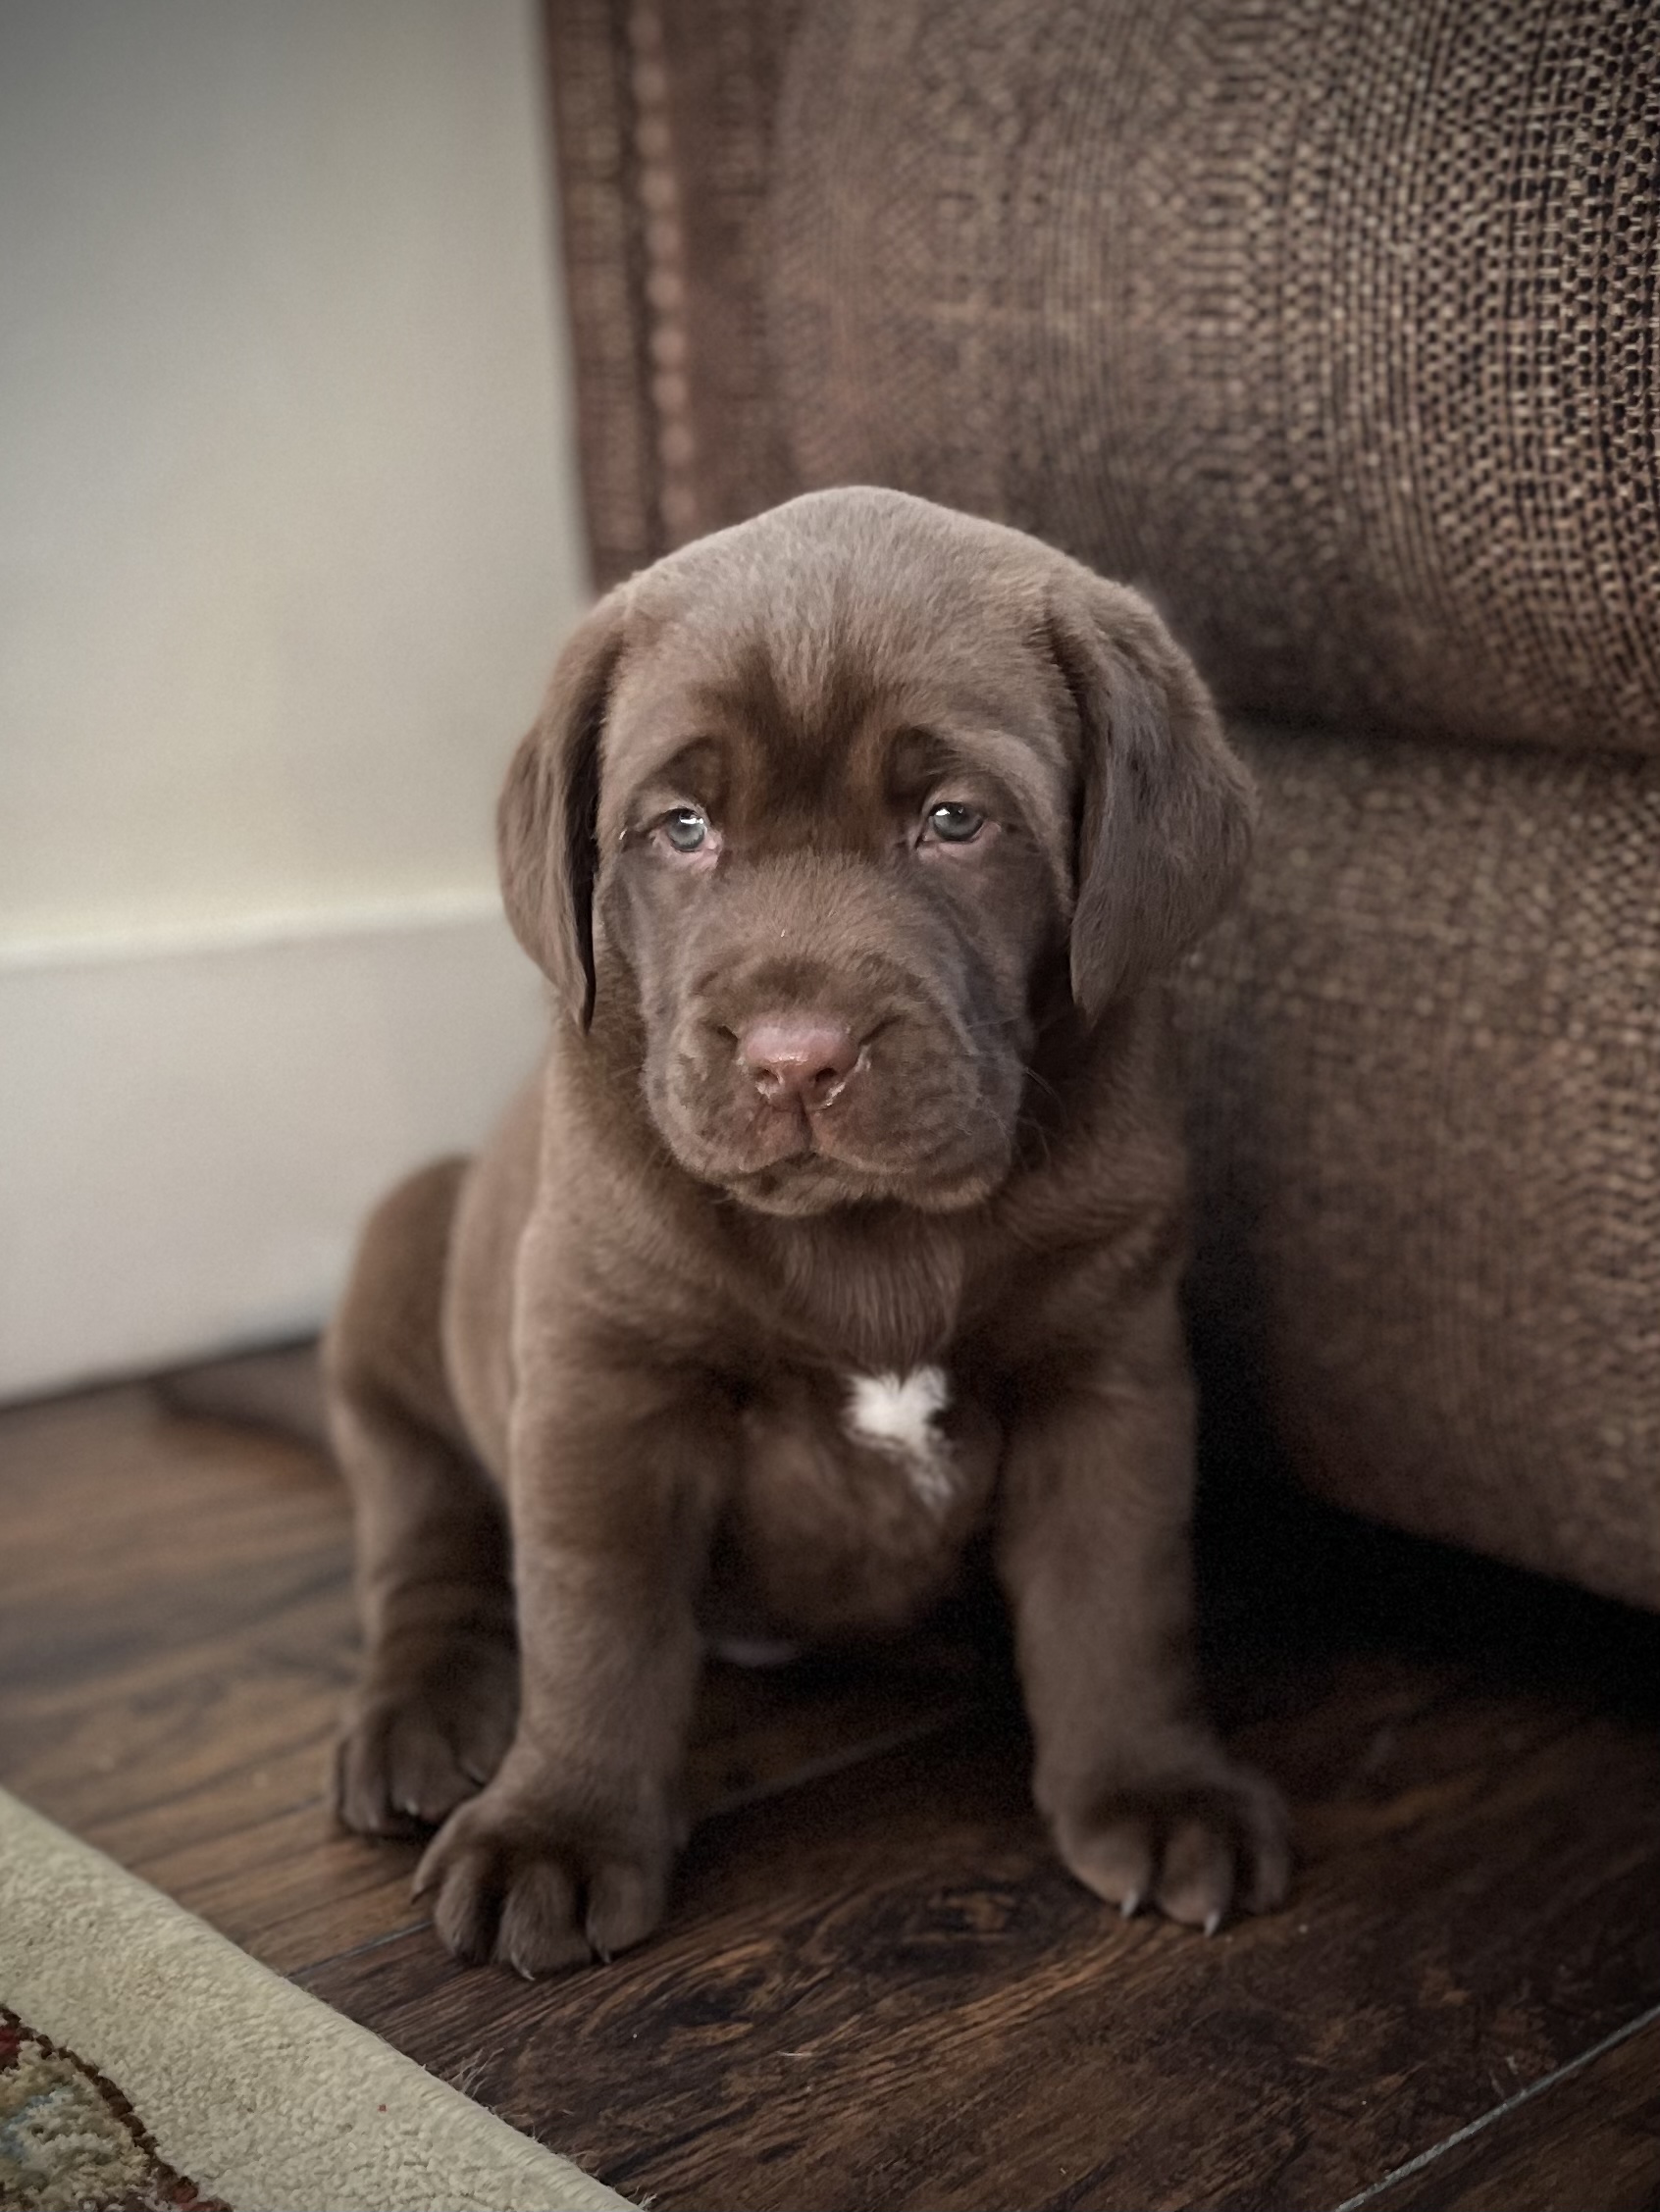 Sweet Chocolate Lab Puppy for  Sweet Chocolate Lab Puppy for that special valentine! AKC registered, shots and papers. Well socialized. Ready to go home 02/04. (208)877-1032